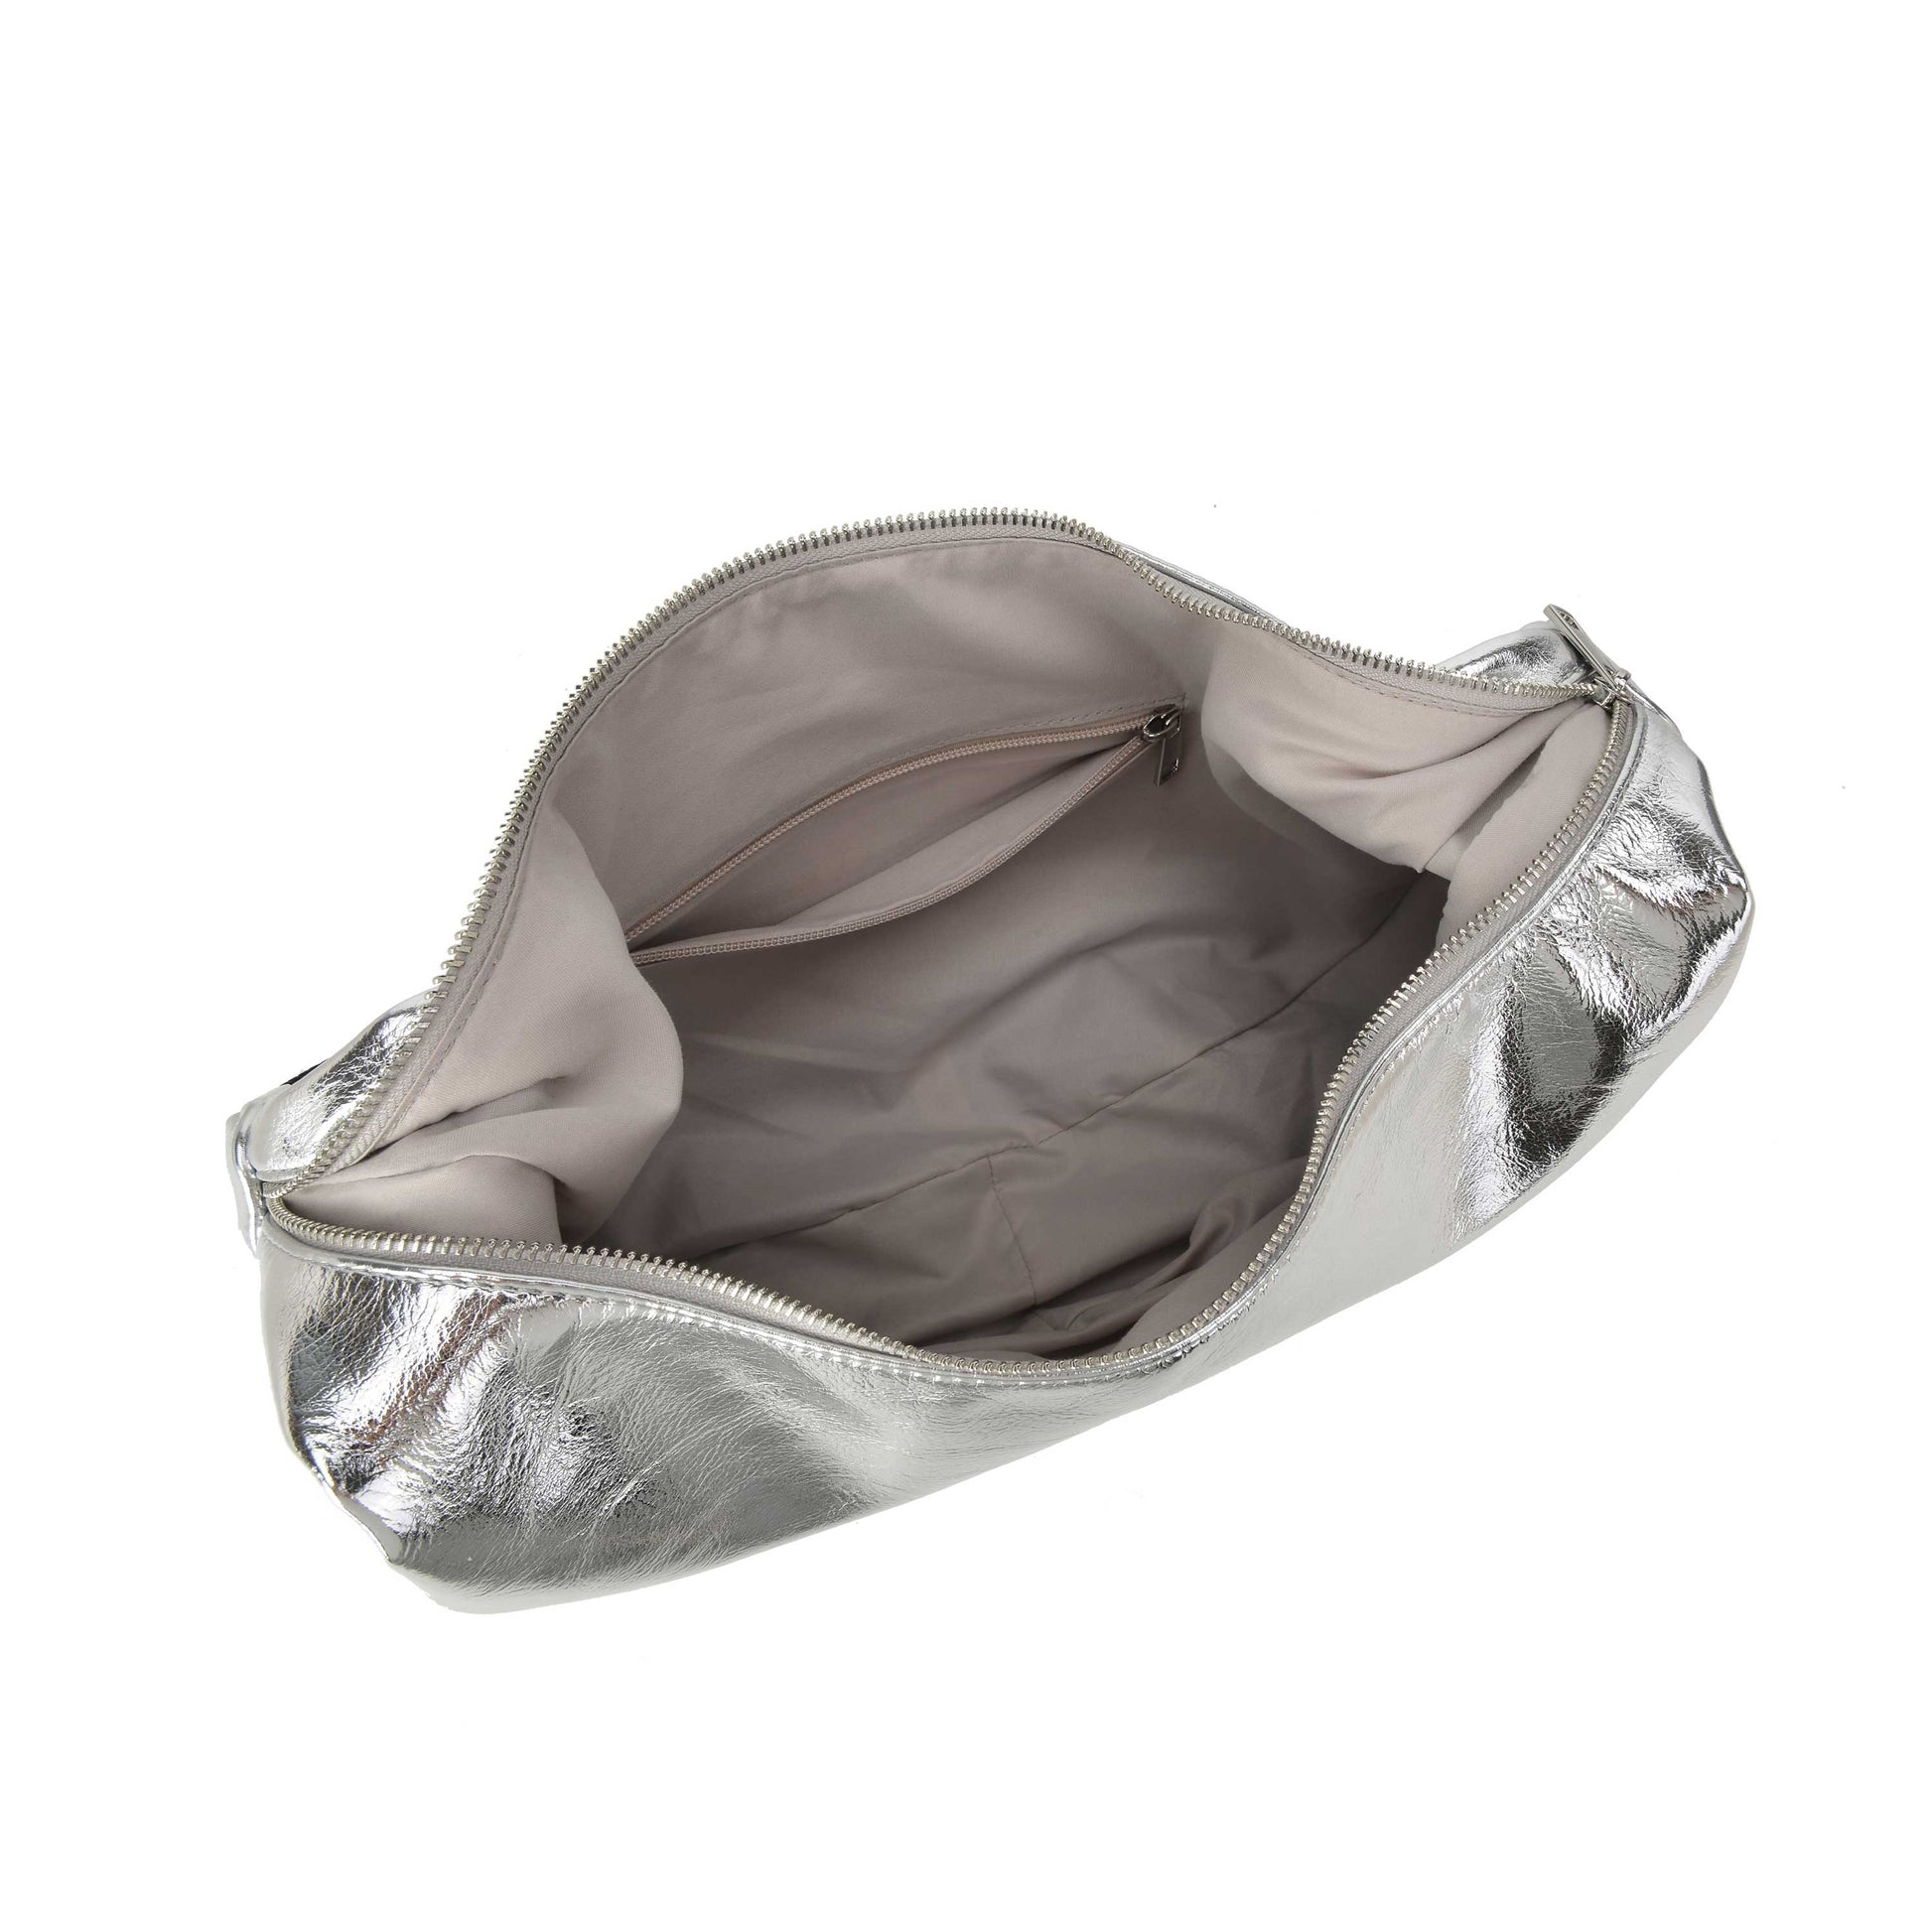 Núnoo Stella recycled cool silver Shoulder bags Silver